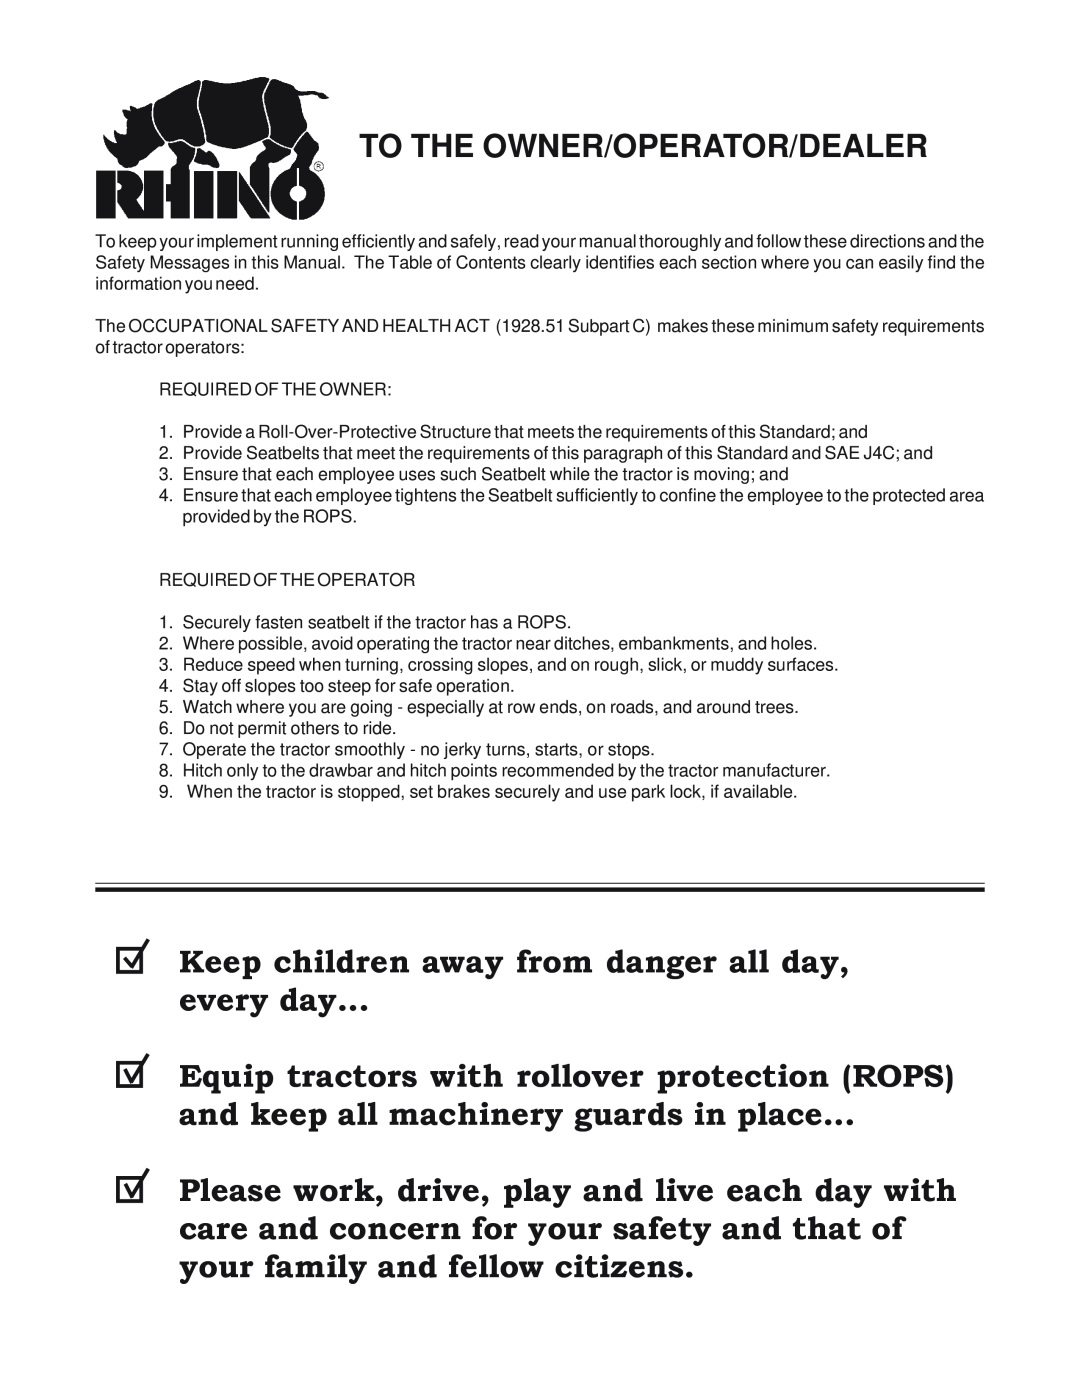 Rhino Mounts GK6072 manual To The Owner/Operator/Dealer, Keep children away from danger all day every day 